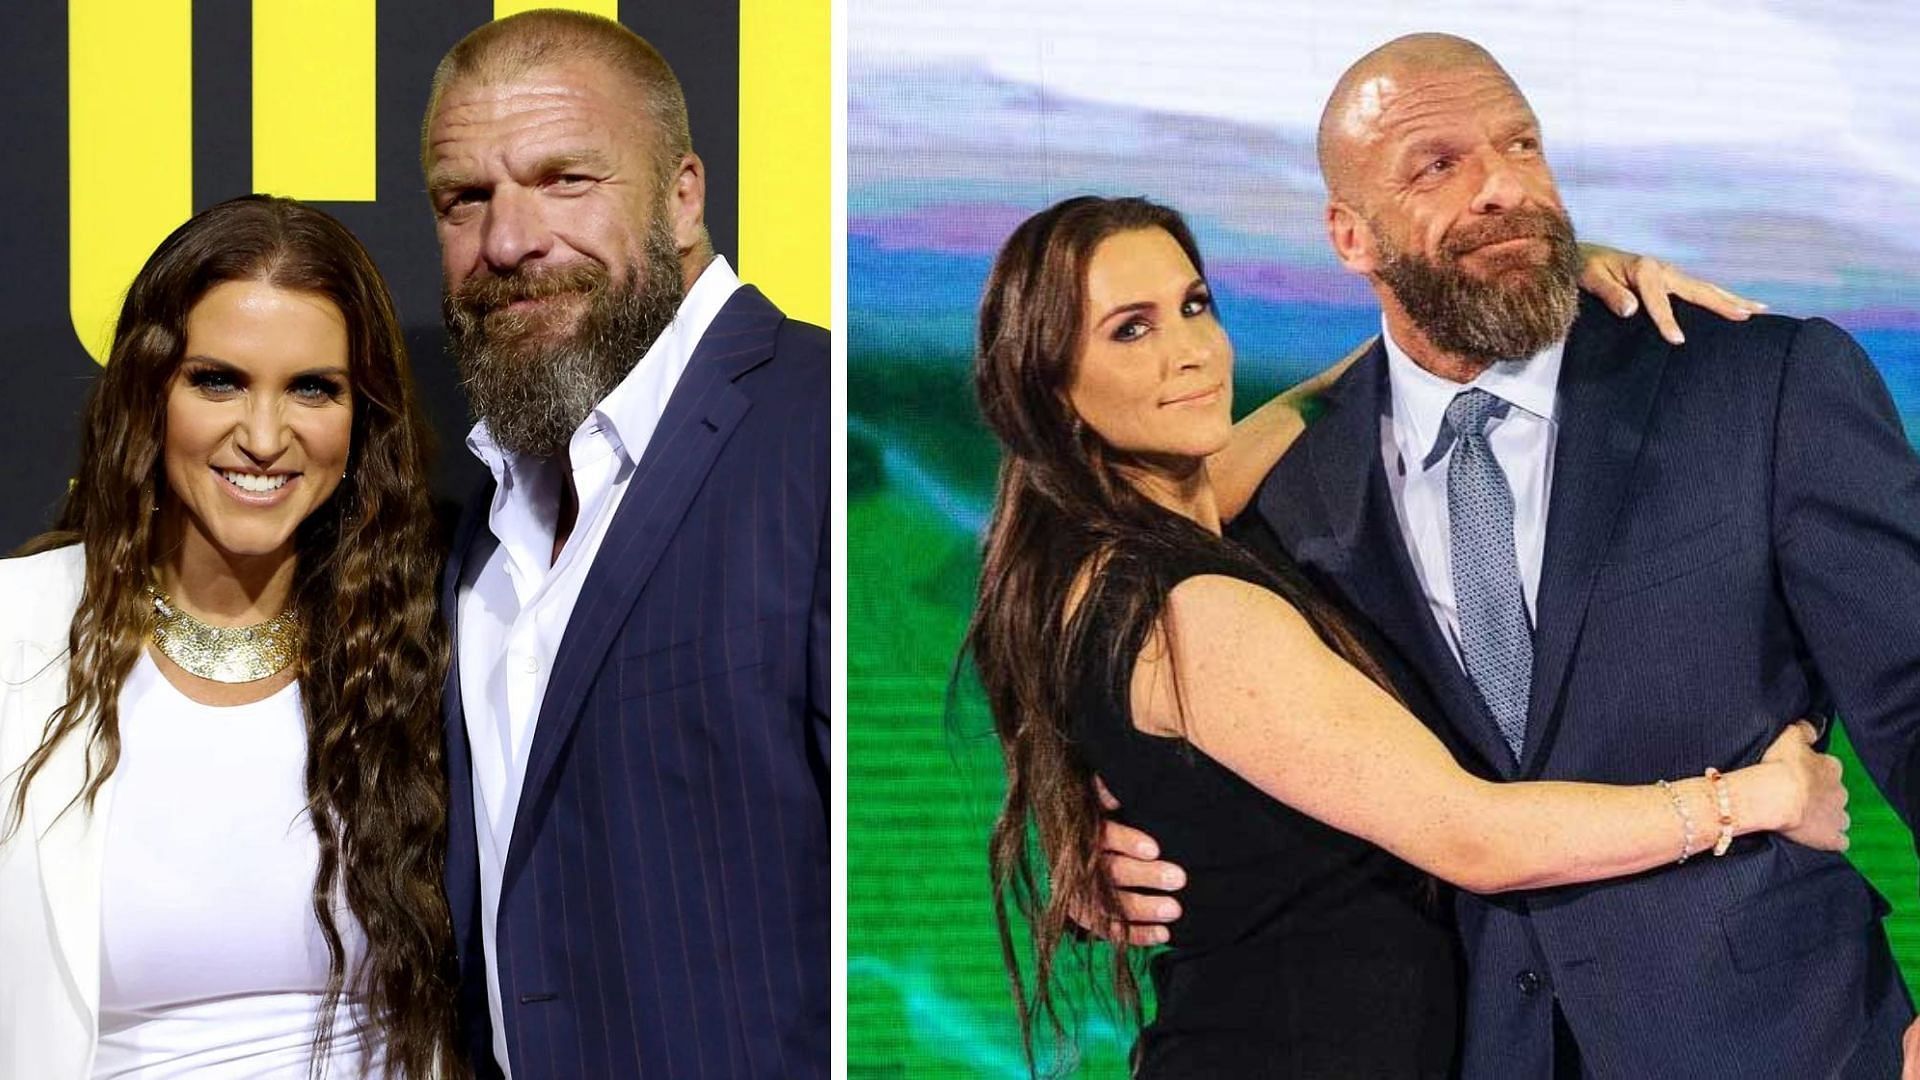 Triple H and Stephanie McMahon are at the top of WWE